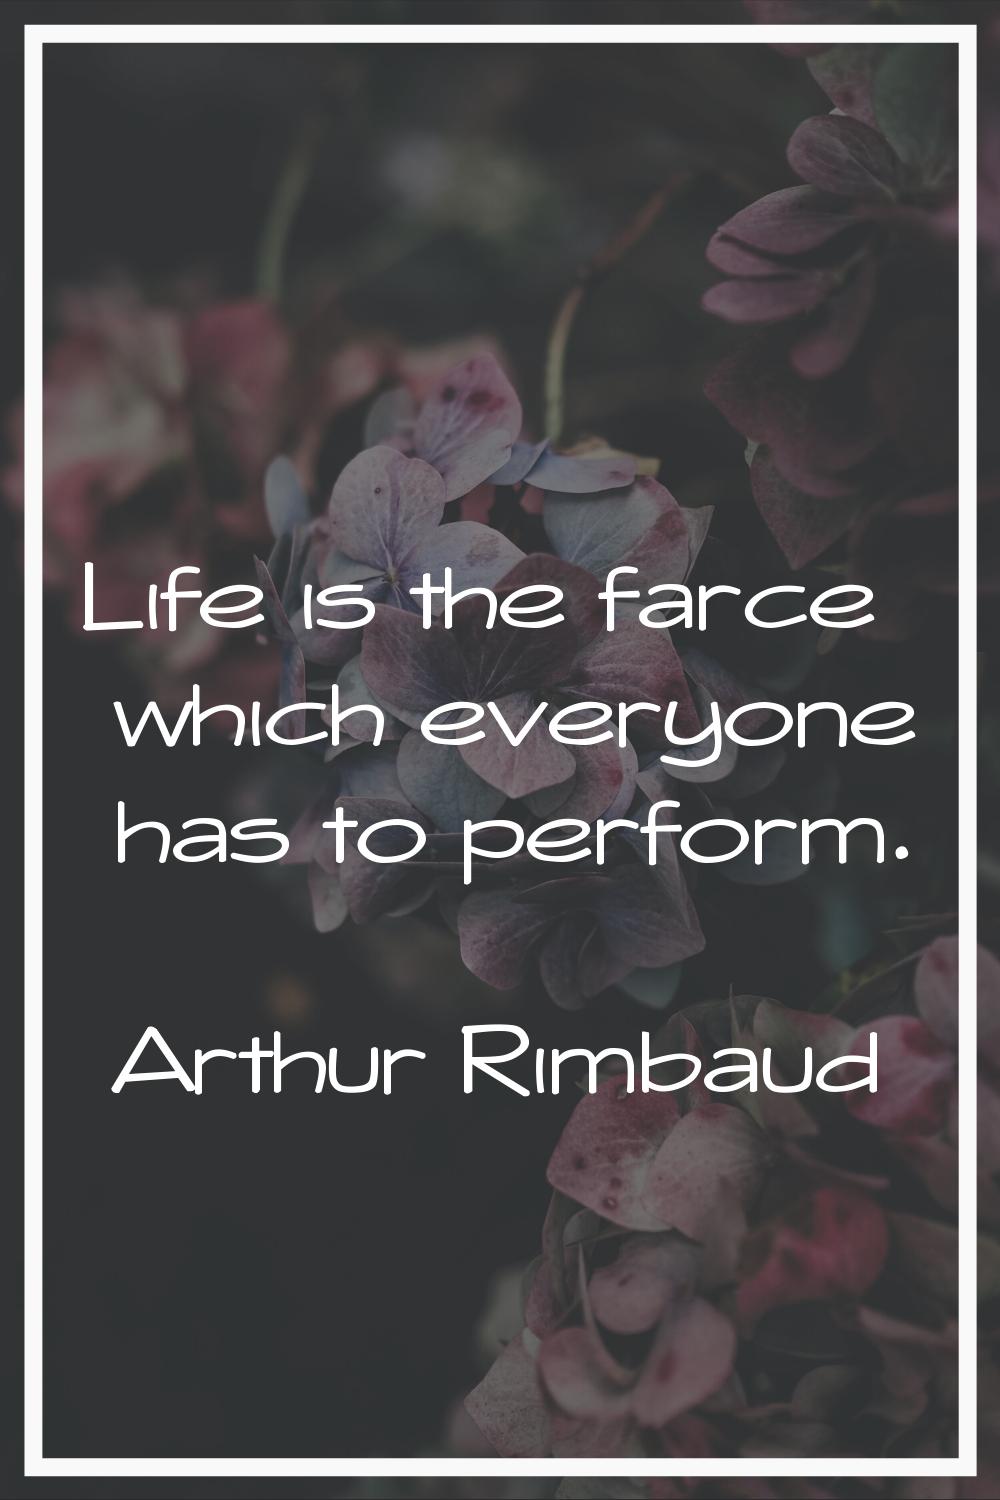 Life is the farce which everyone has to perform.